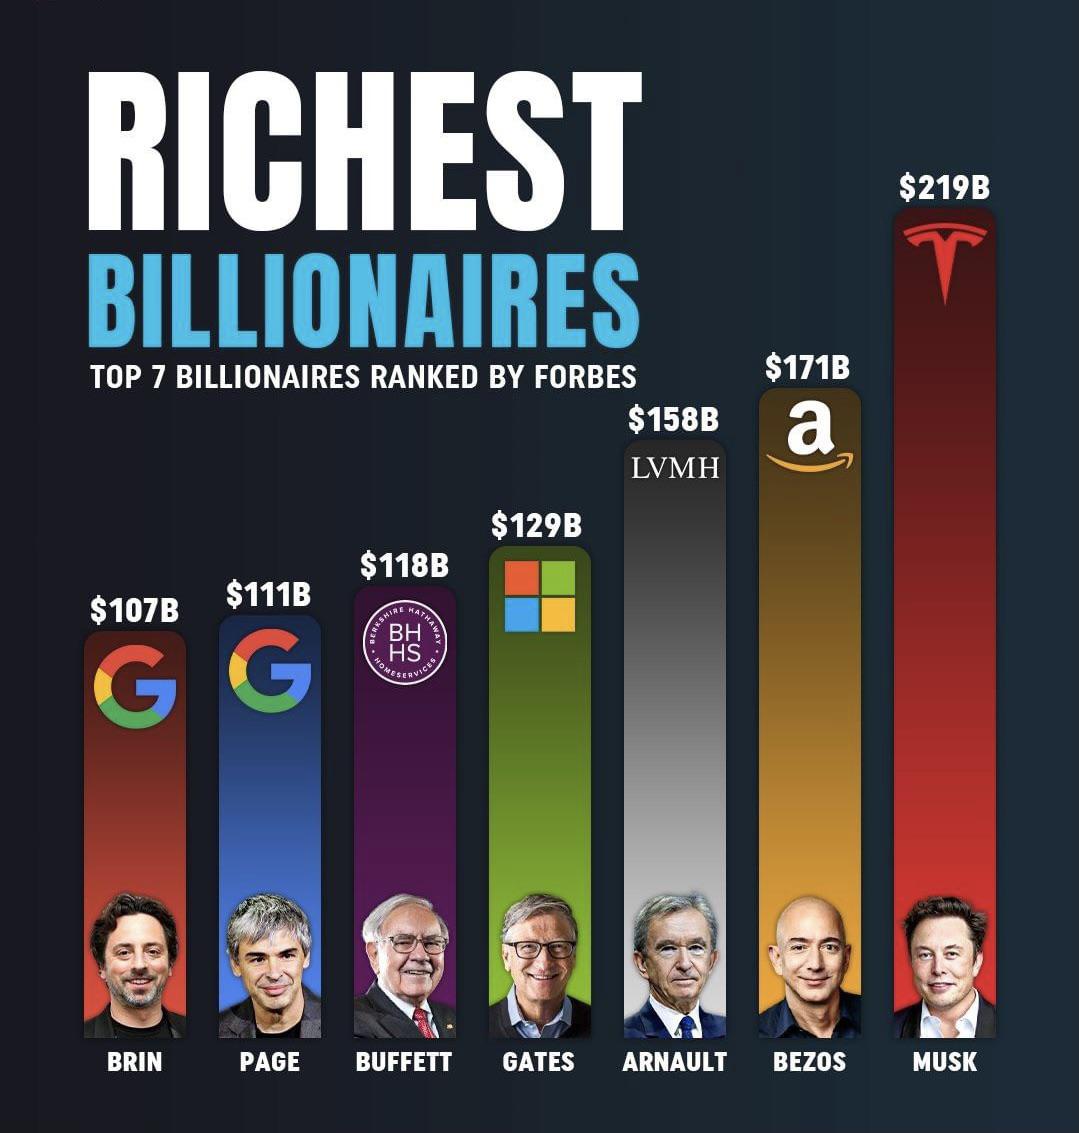 Here's how the 7 richest people in the world built their wealth